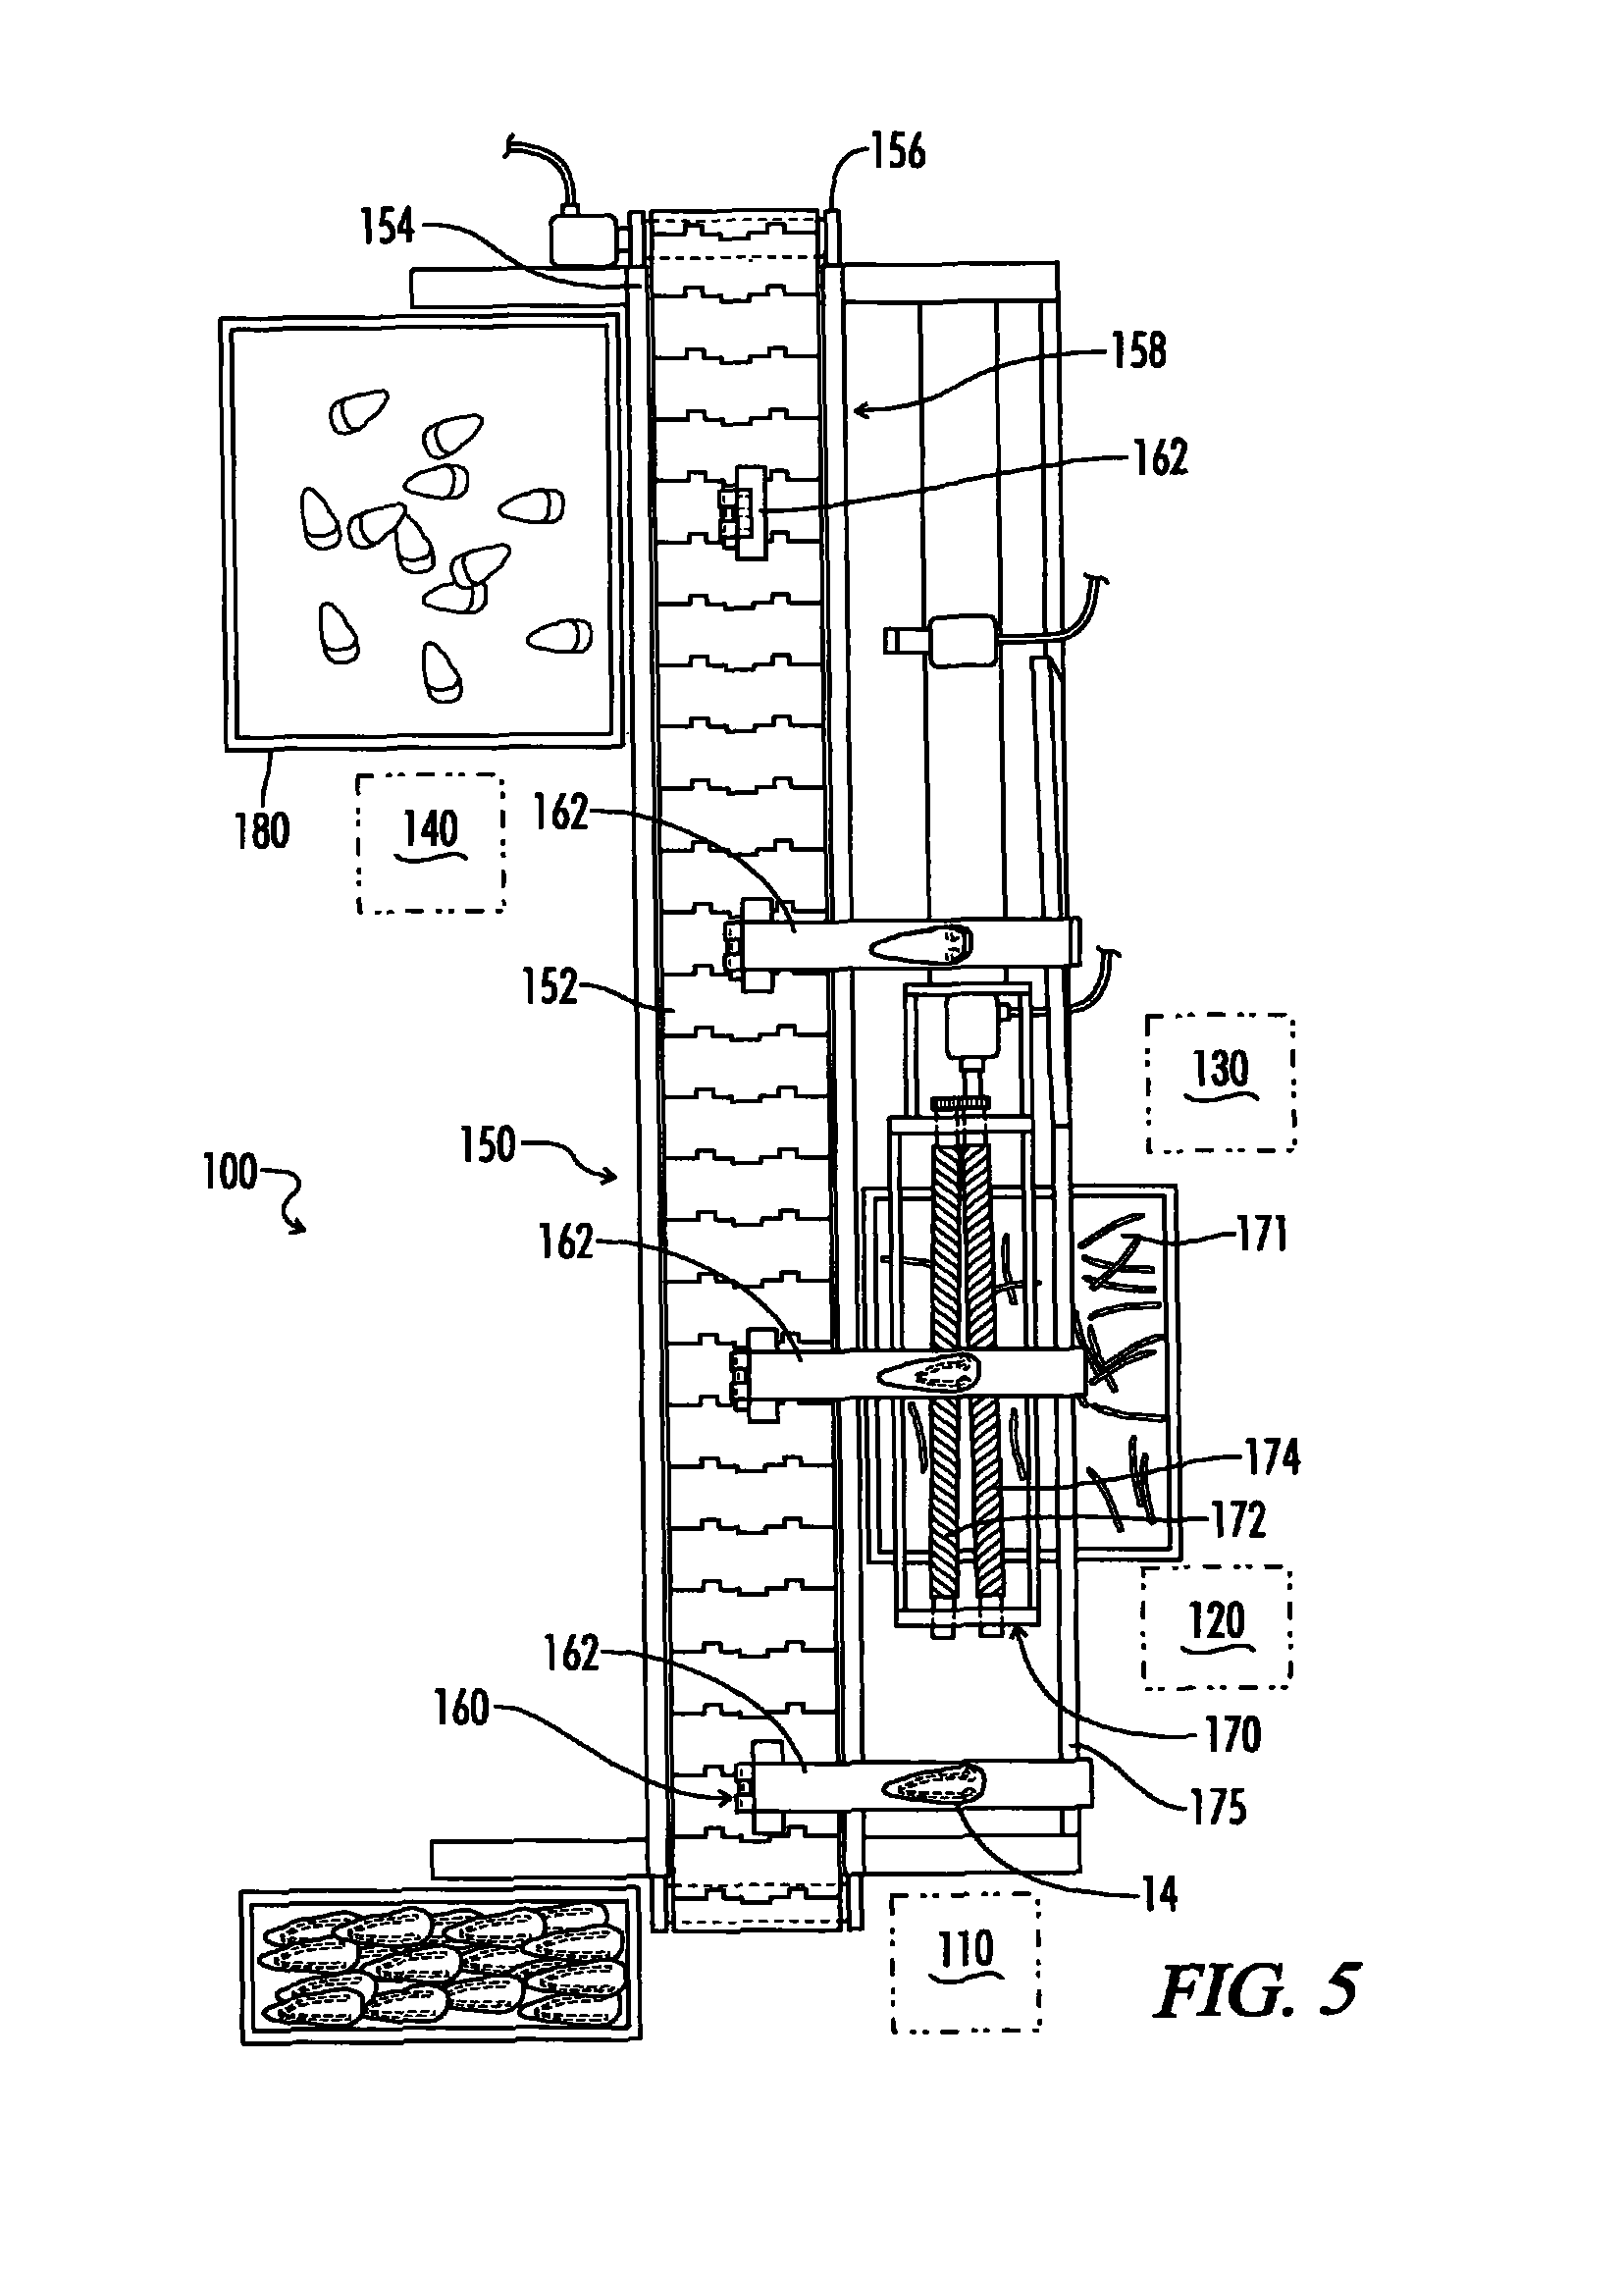 Poultry wing deboning apparatus and method